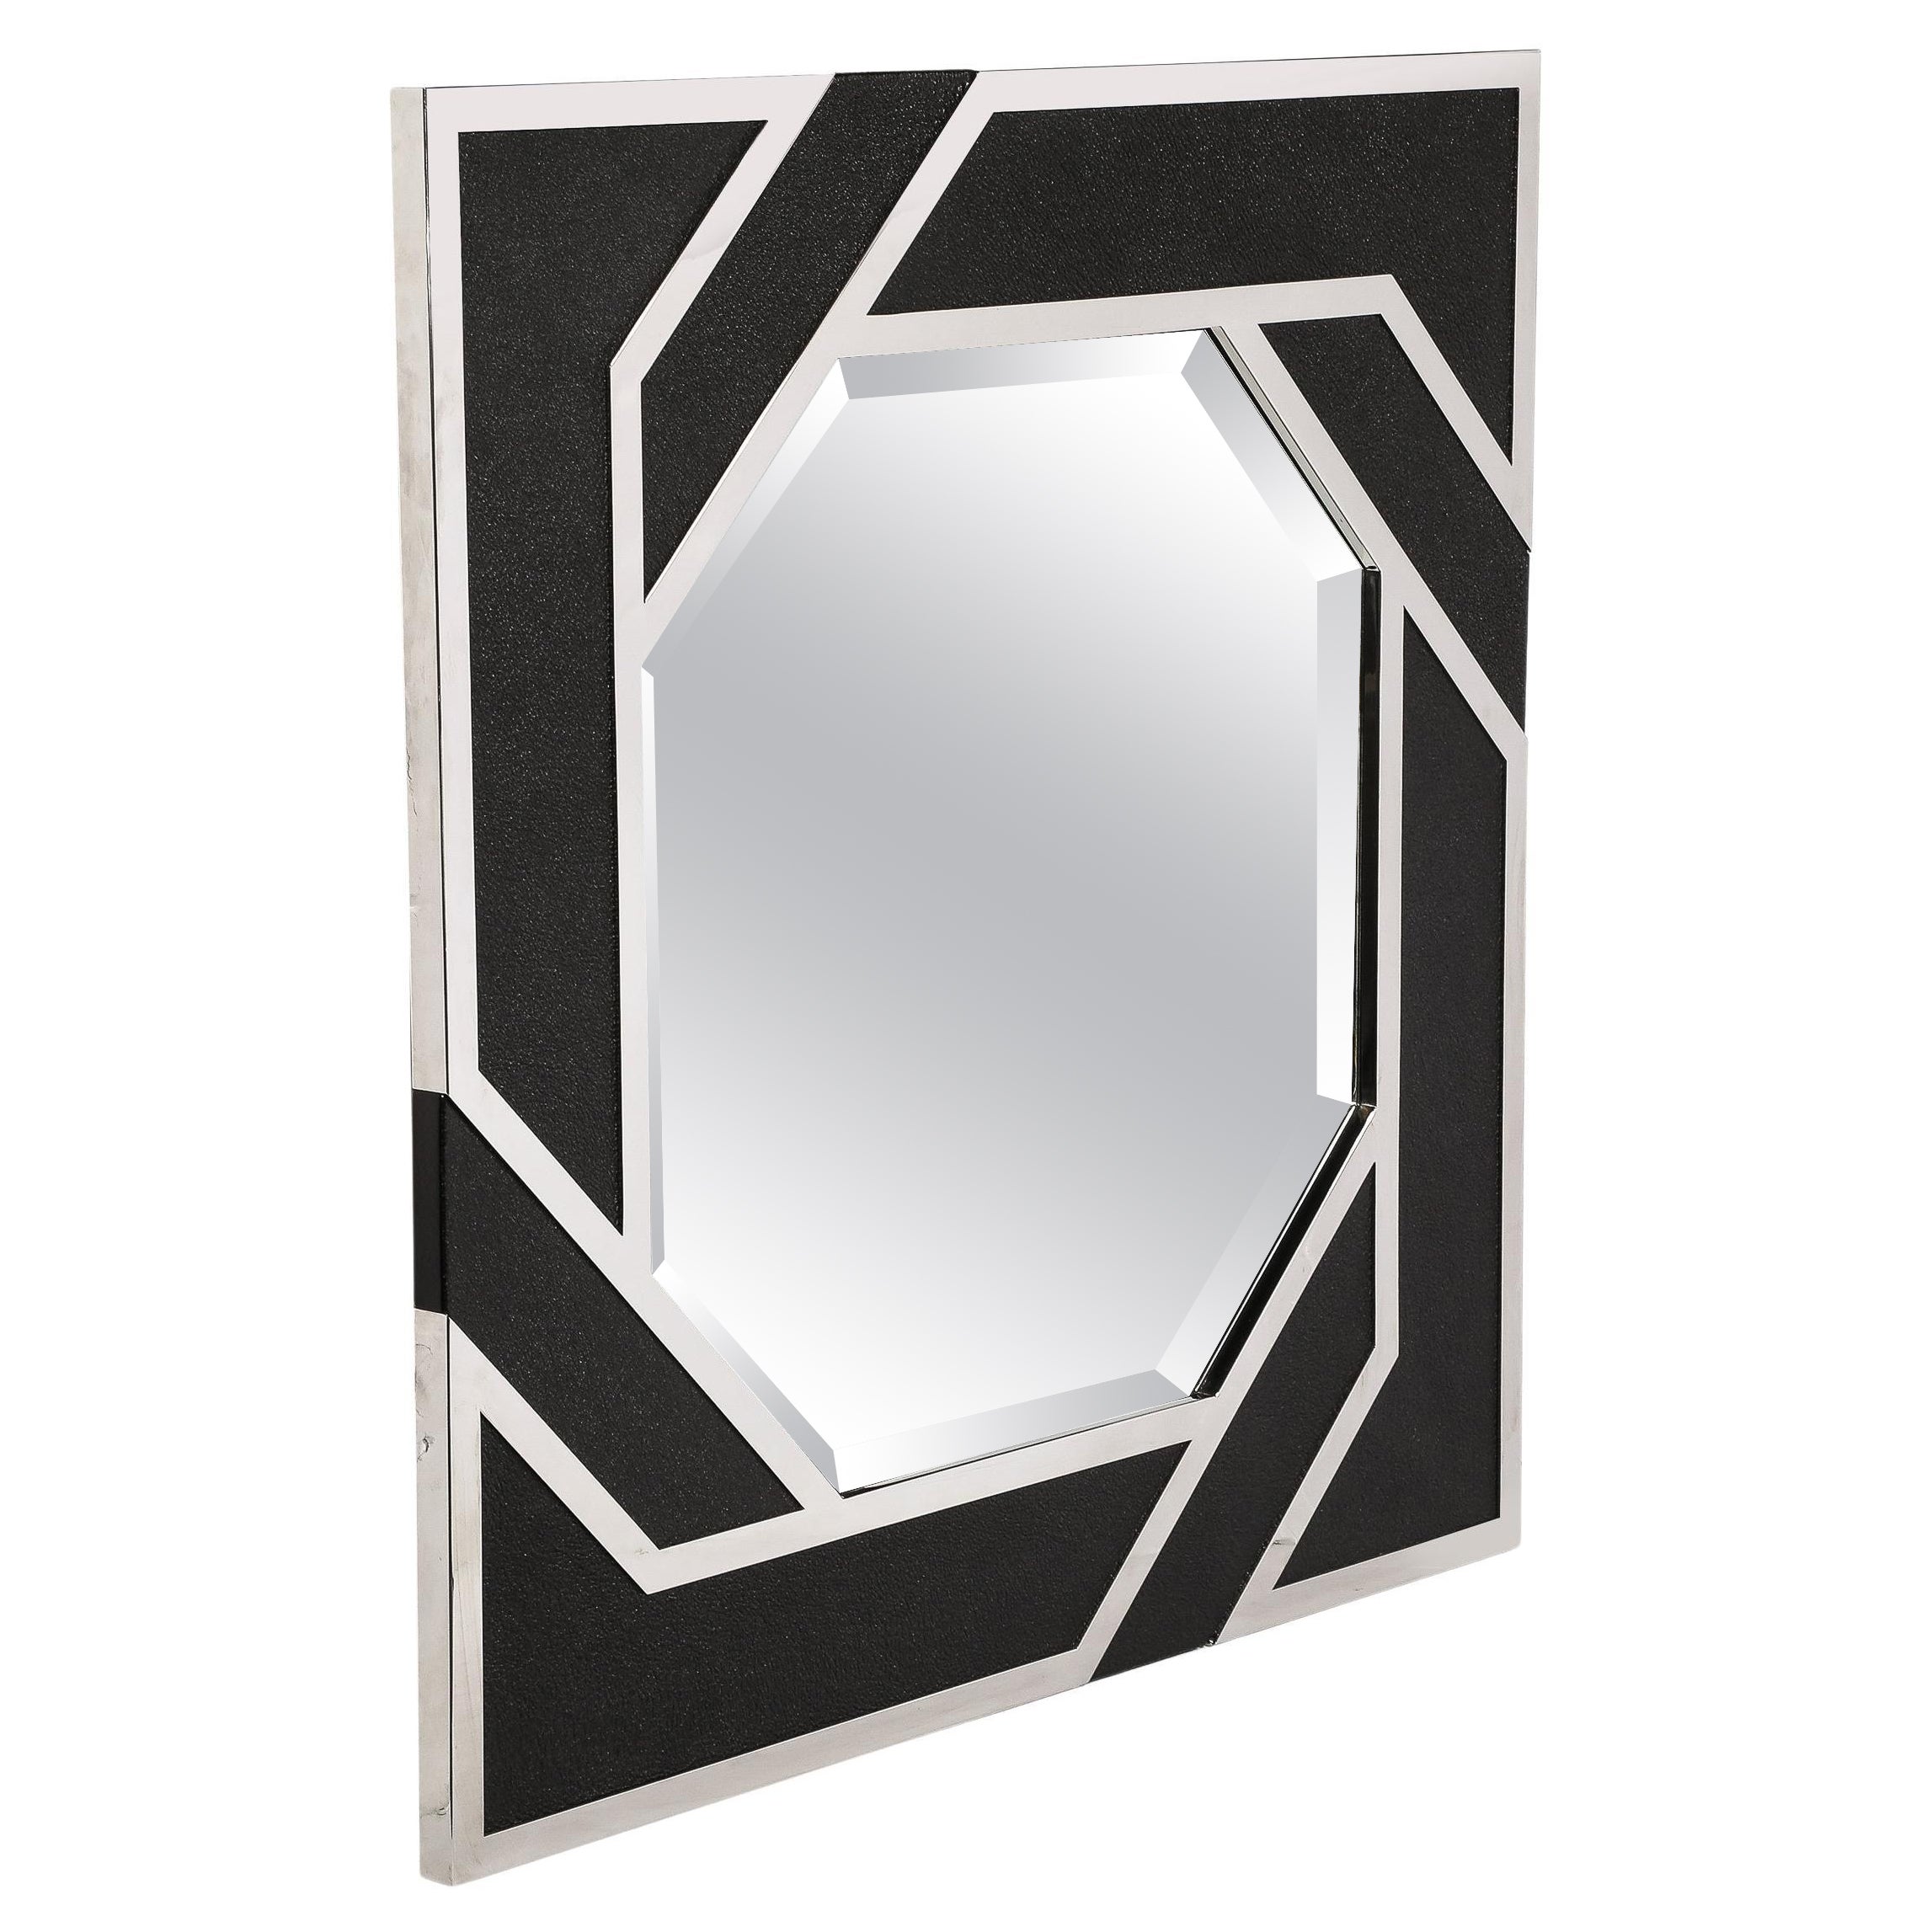 Modernist Embossed Leather & Chrome Spiral Form Geometric Mirror by Lorin Marsh For Sale